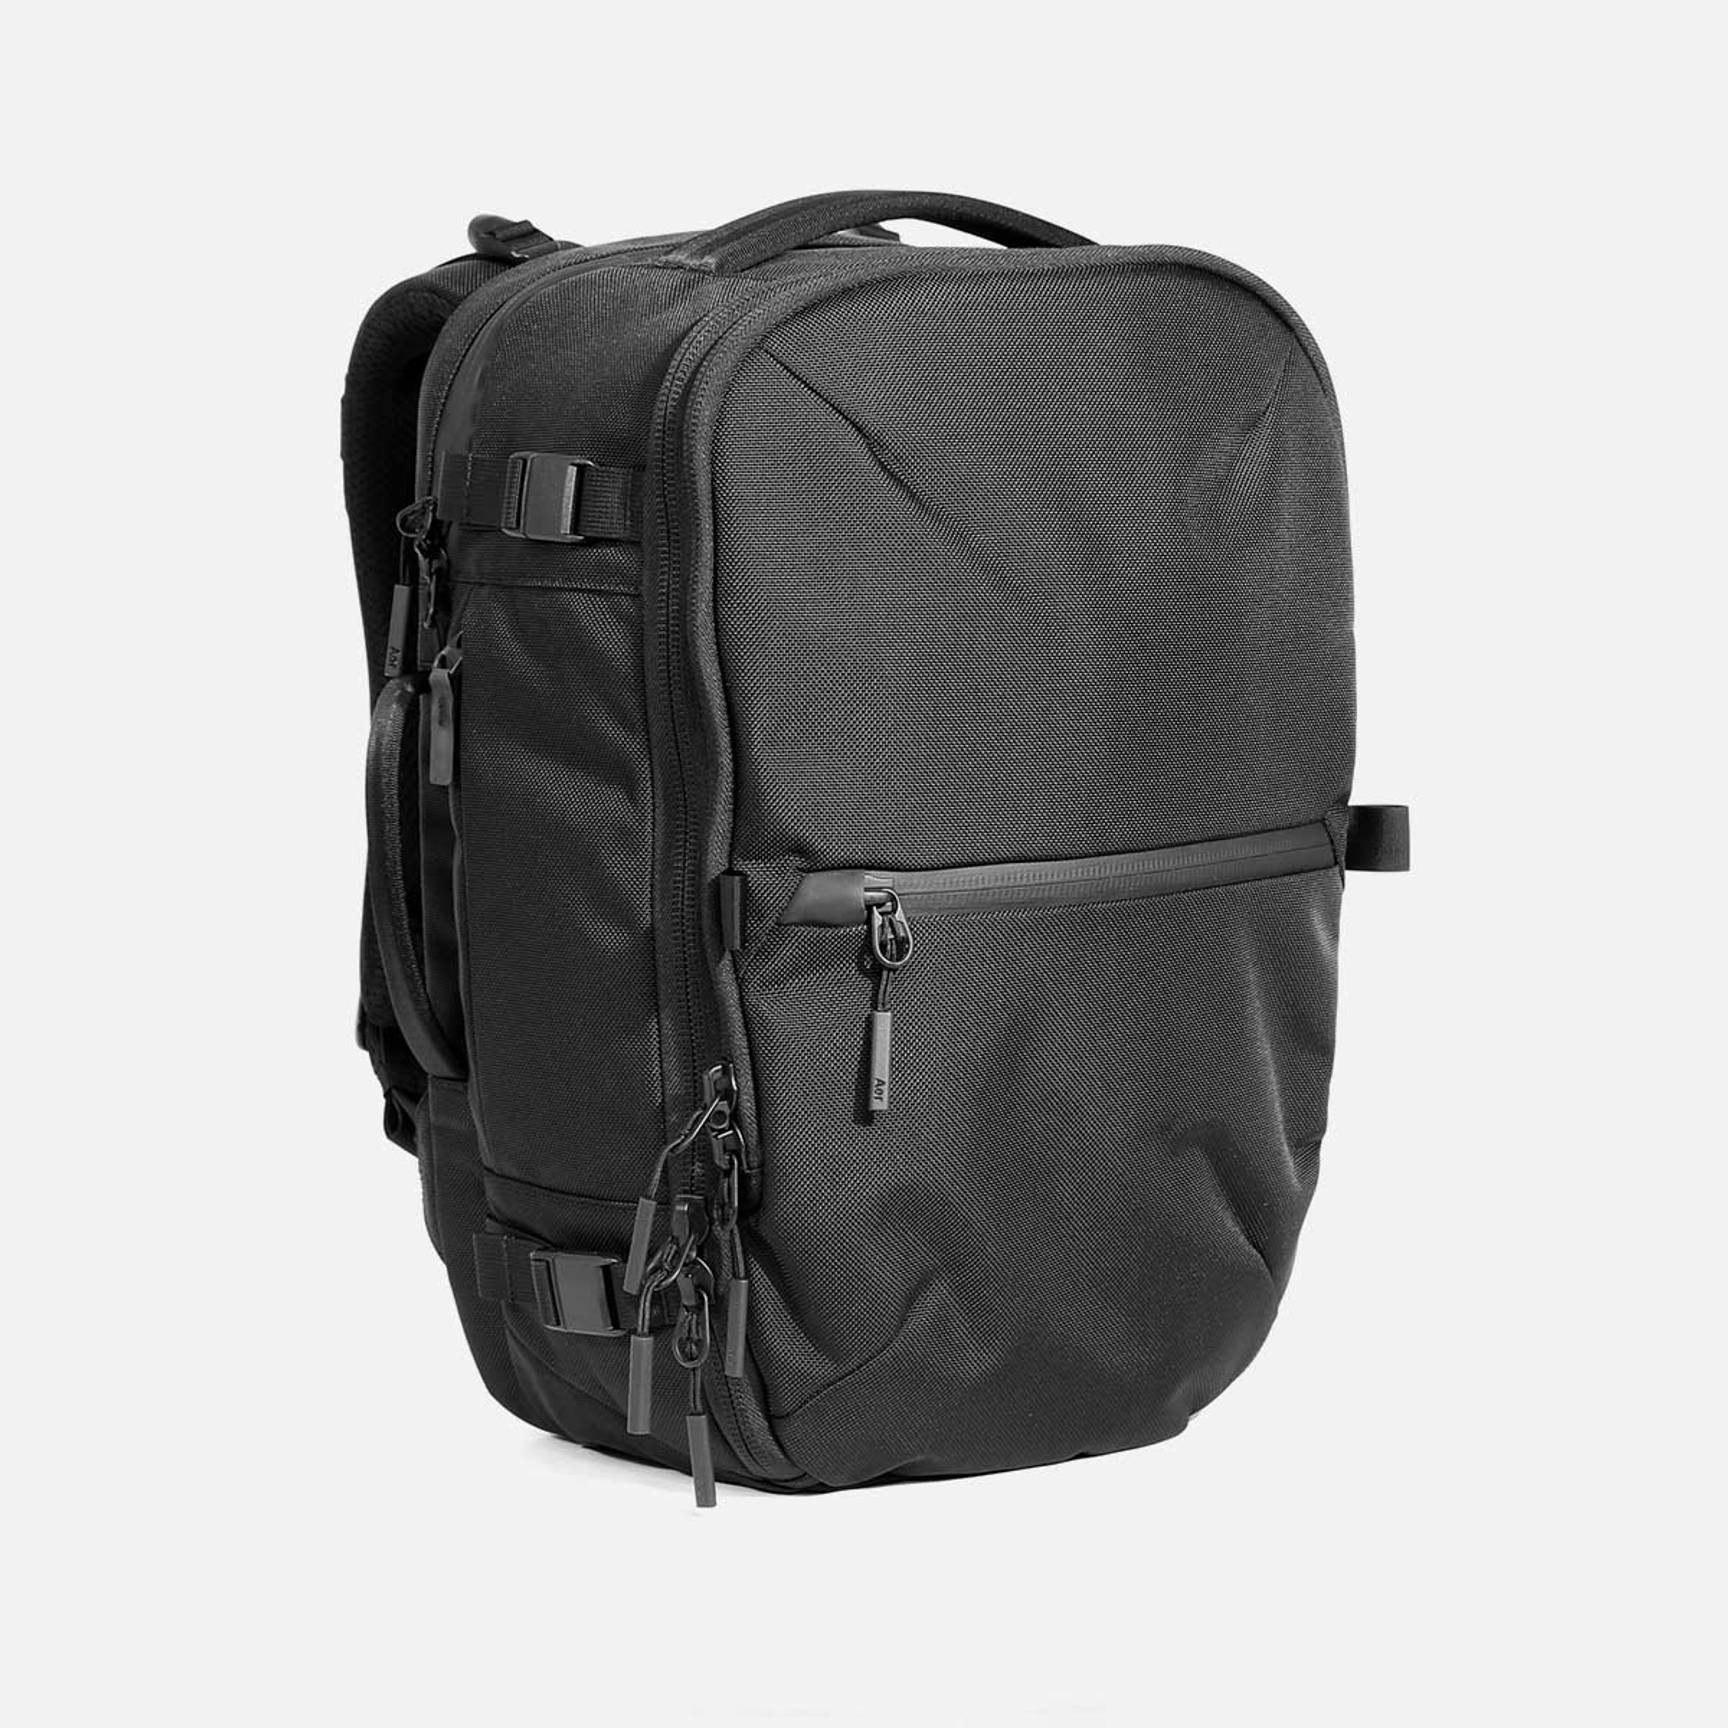 Are small backpacks personal items?